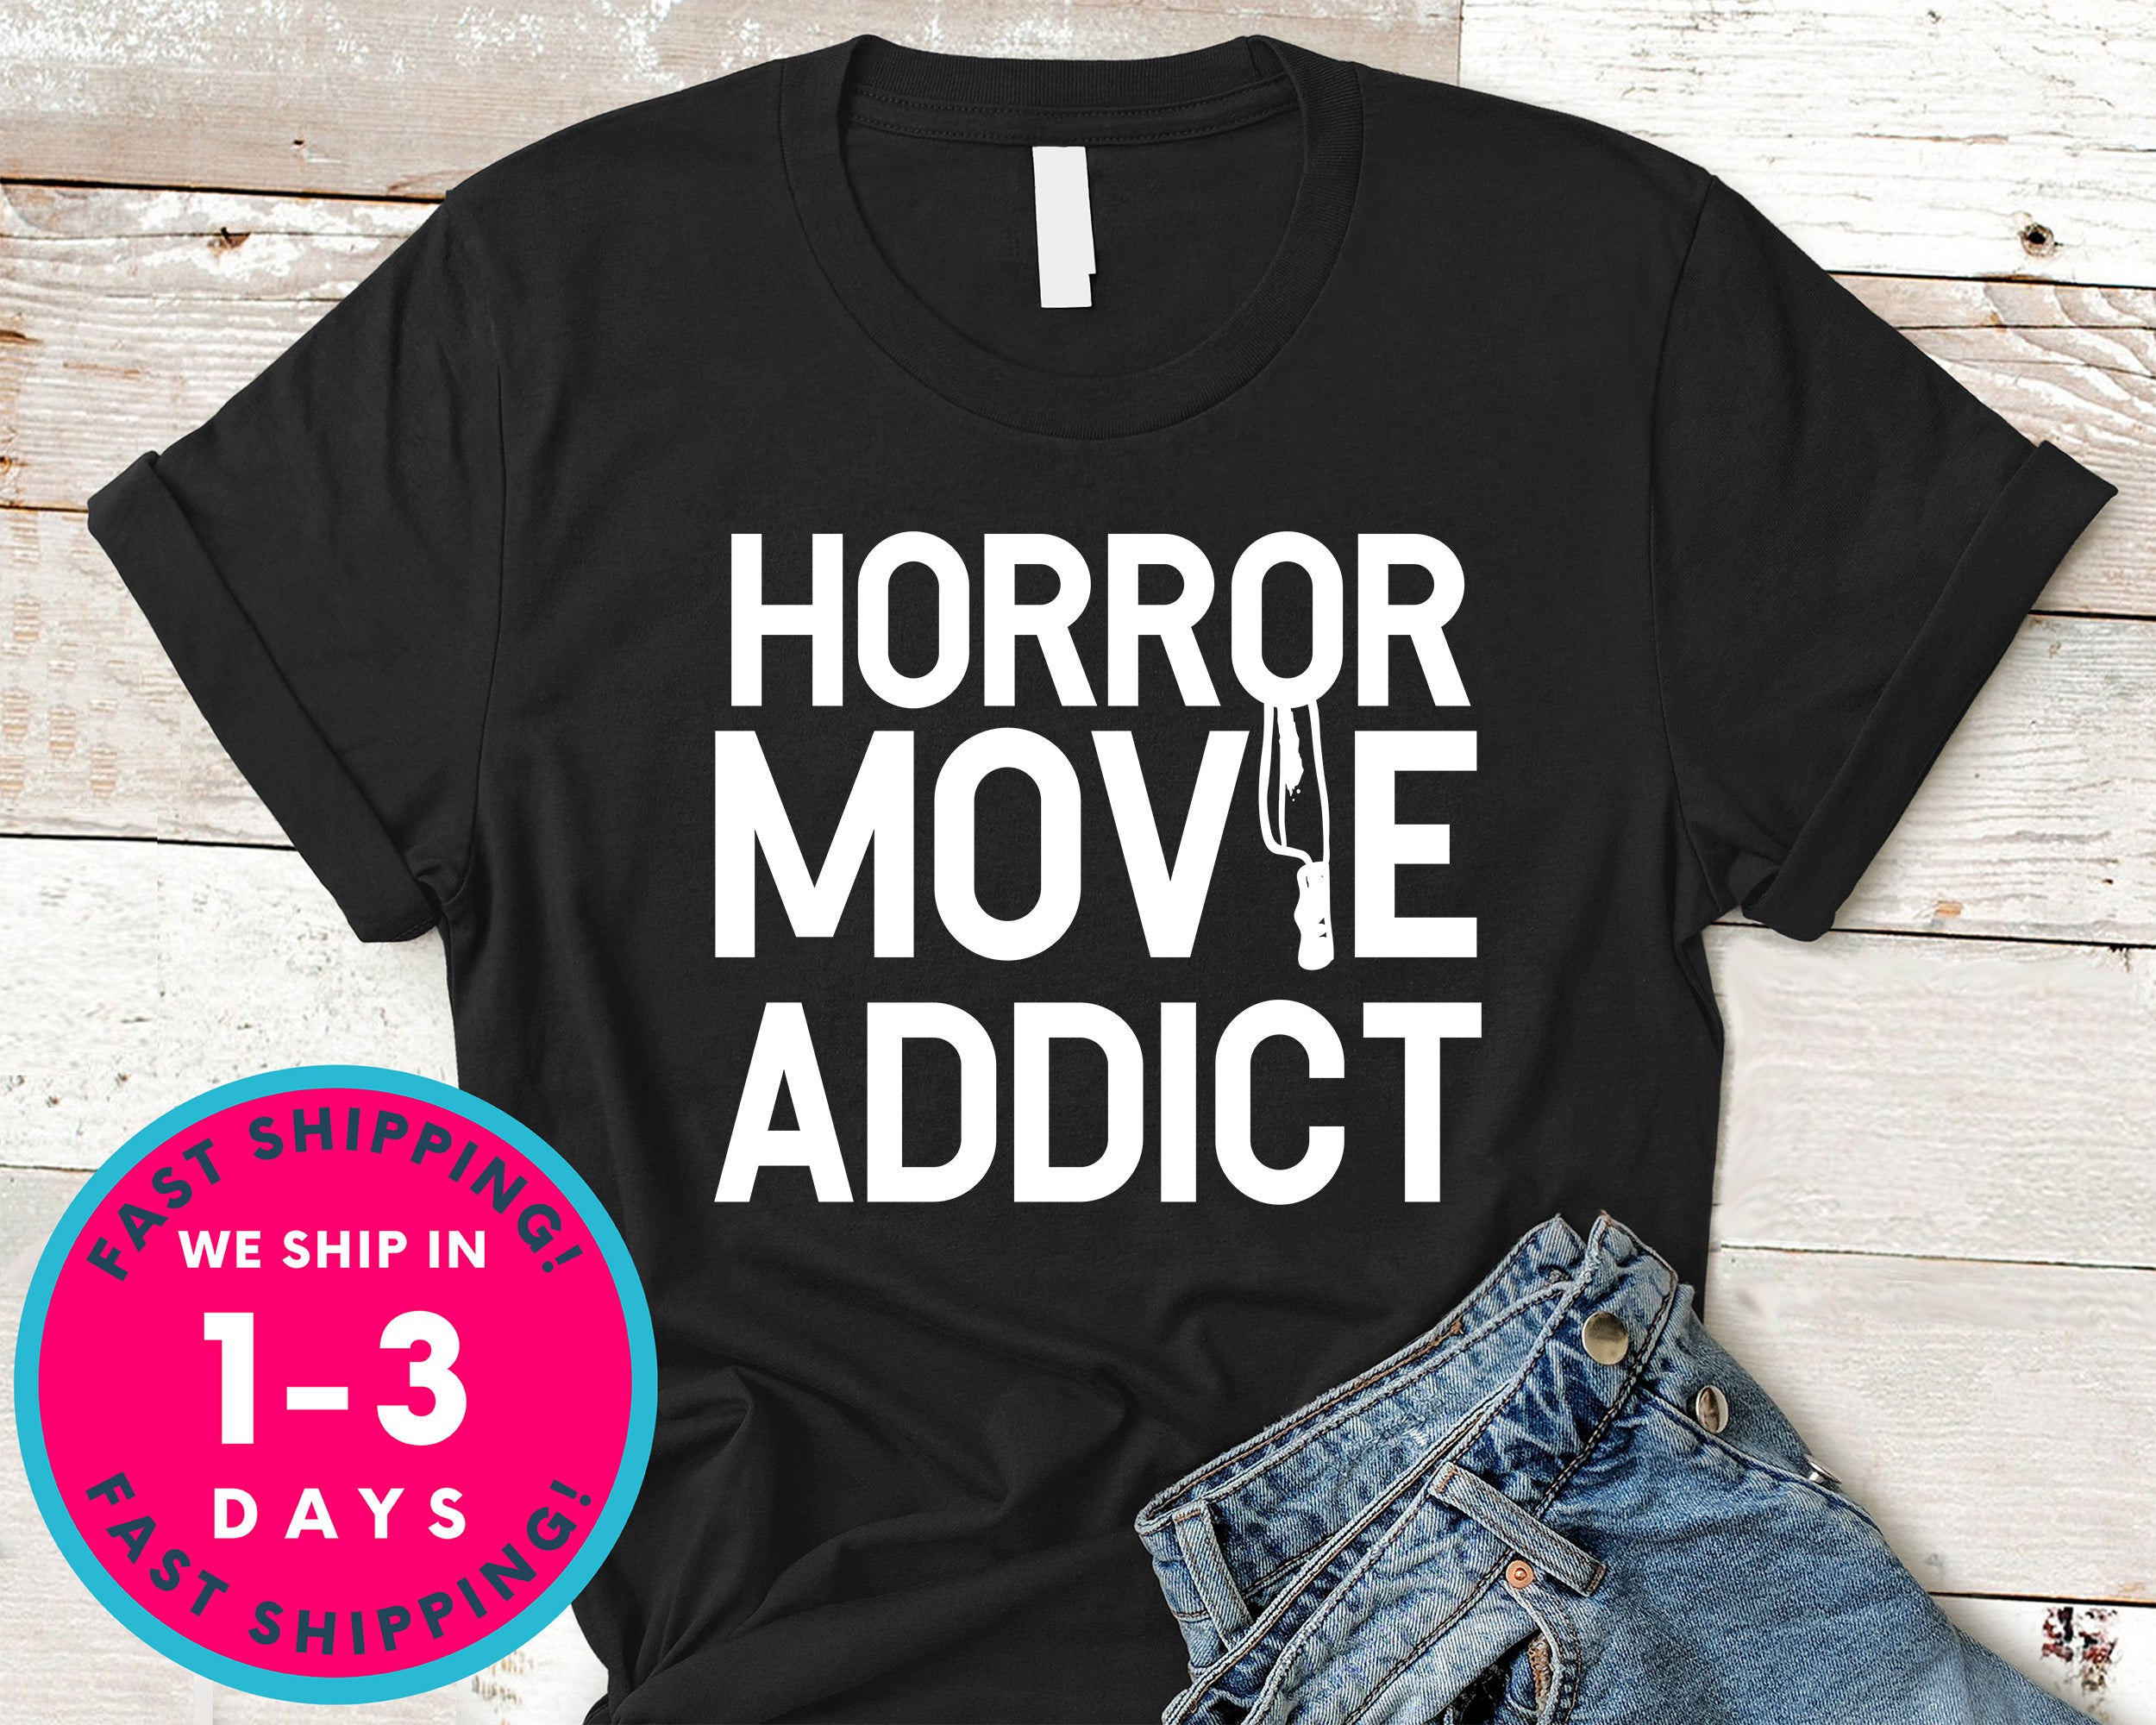 Addicted To Horror Movies T-Shirt - Halloween Horror Scary Shirt